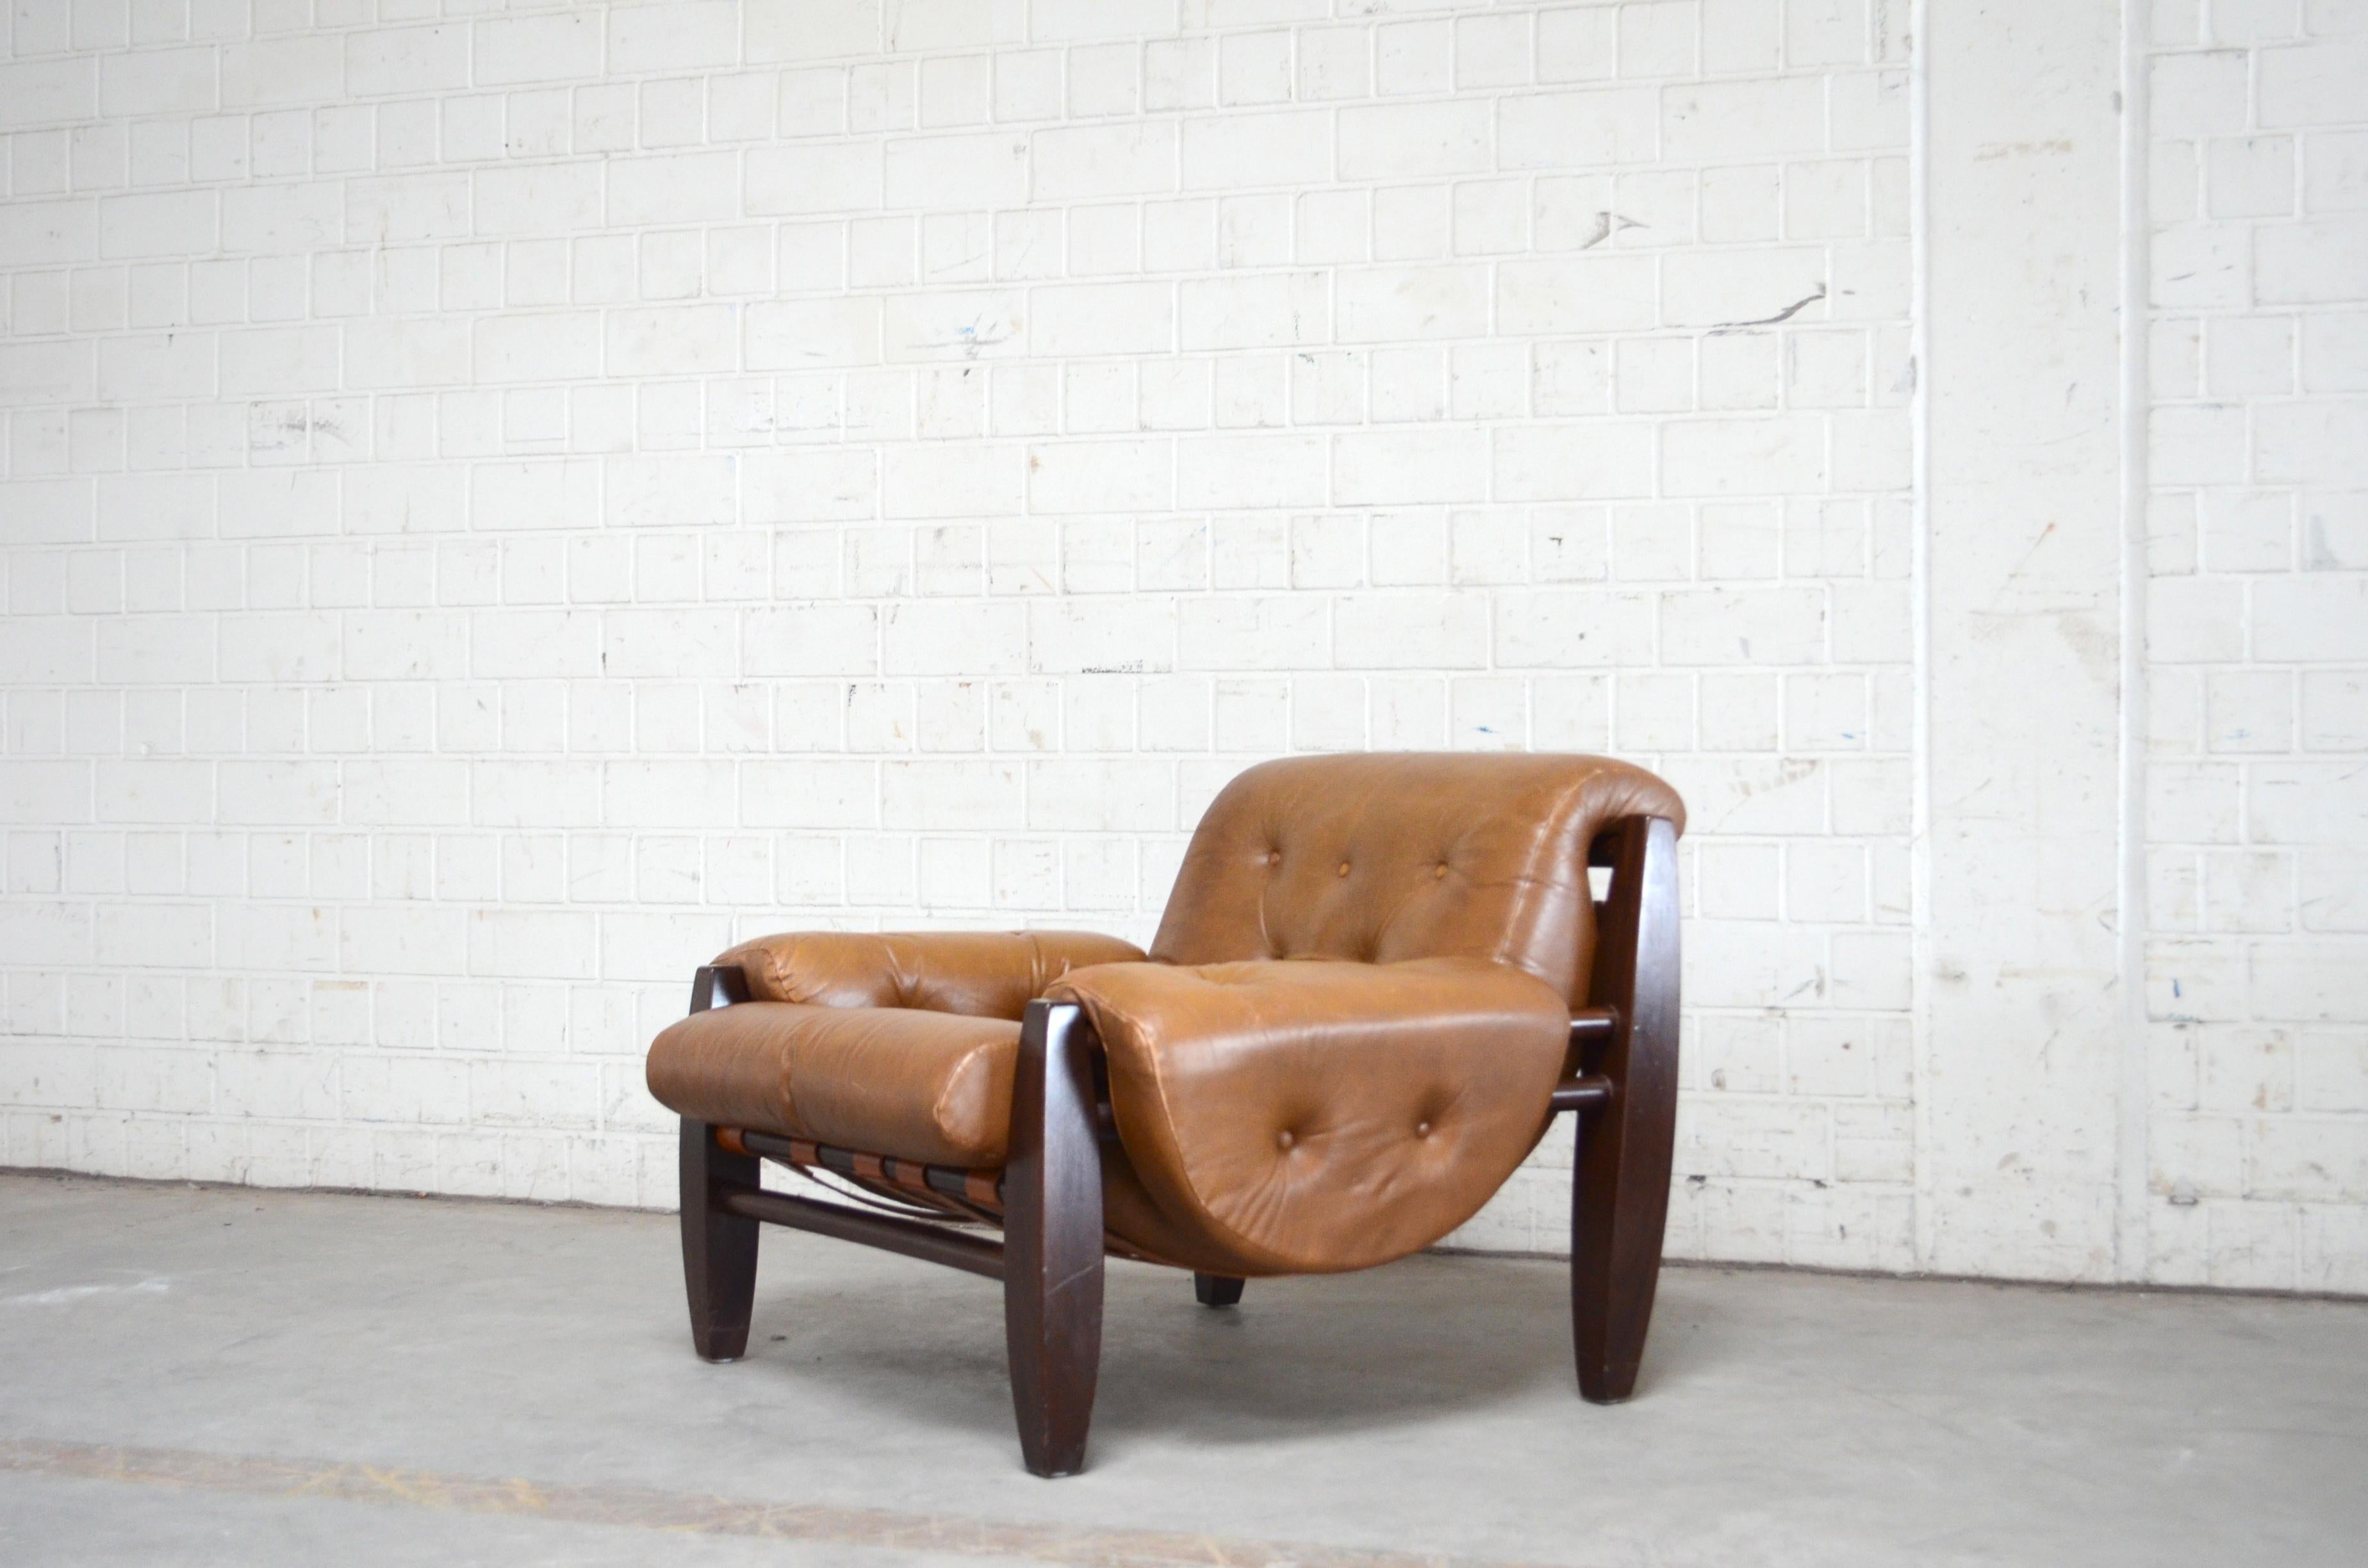 This armchair is from the 1960s. 
It´s made of Pau Ferro wood and cognac leather.
The design has references to Jean Gillon work but the manufacture and designer is unknown.